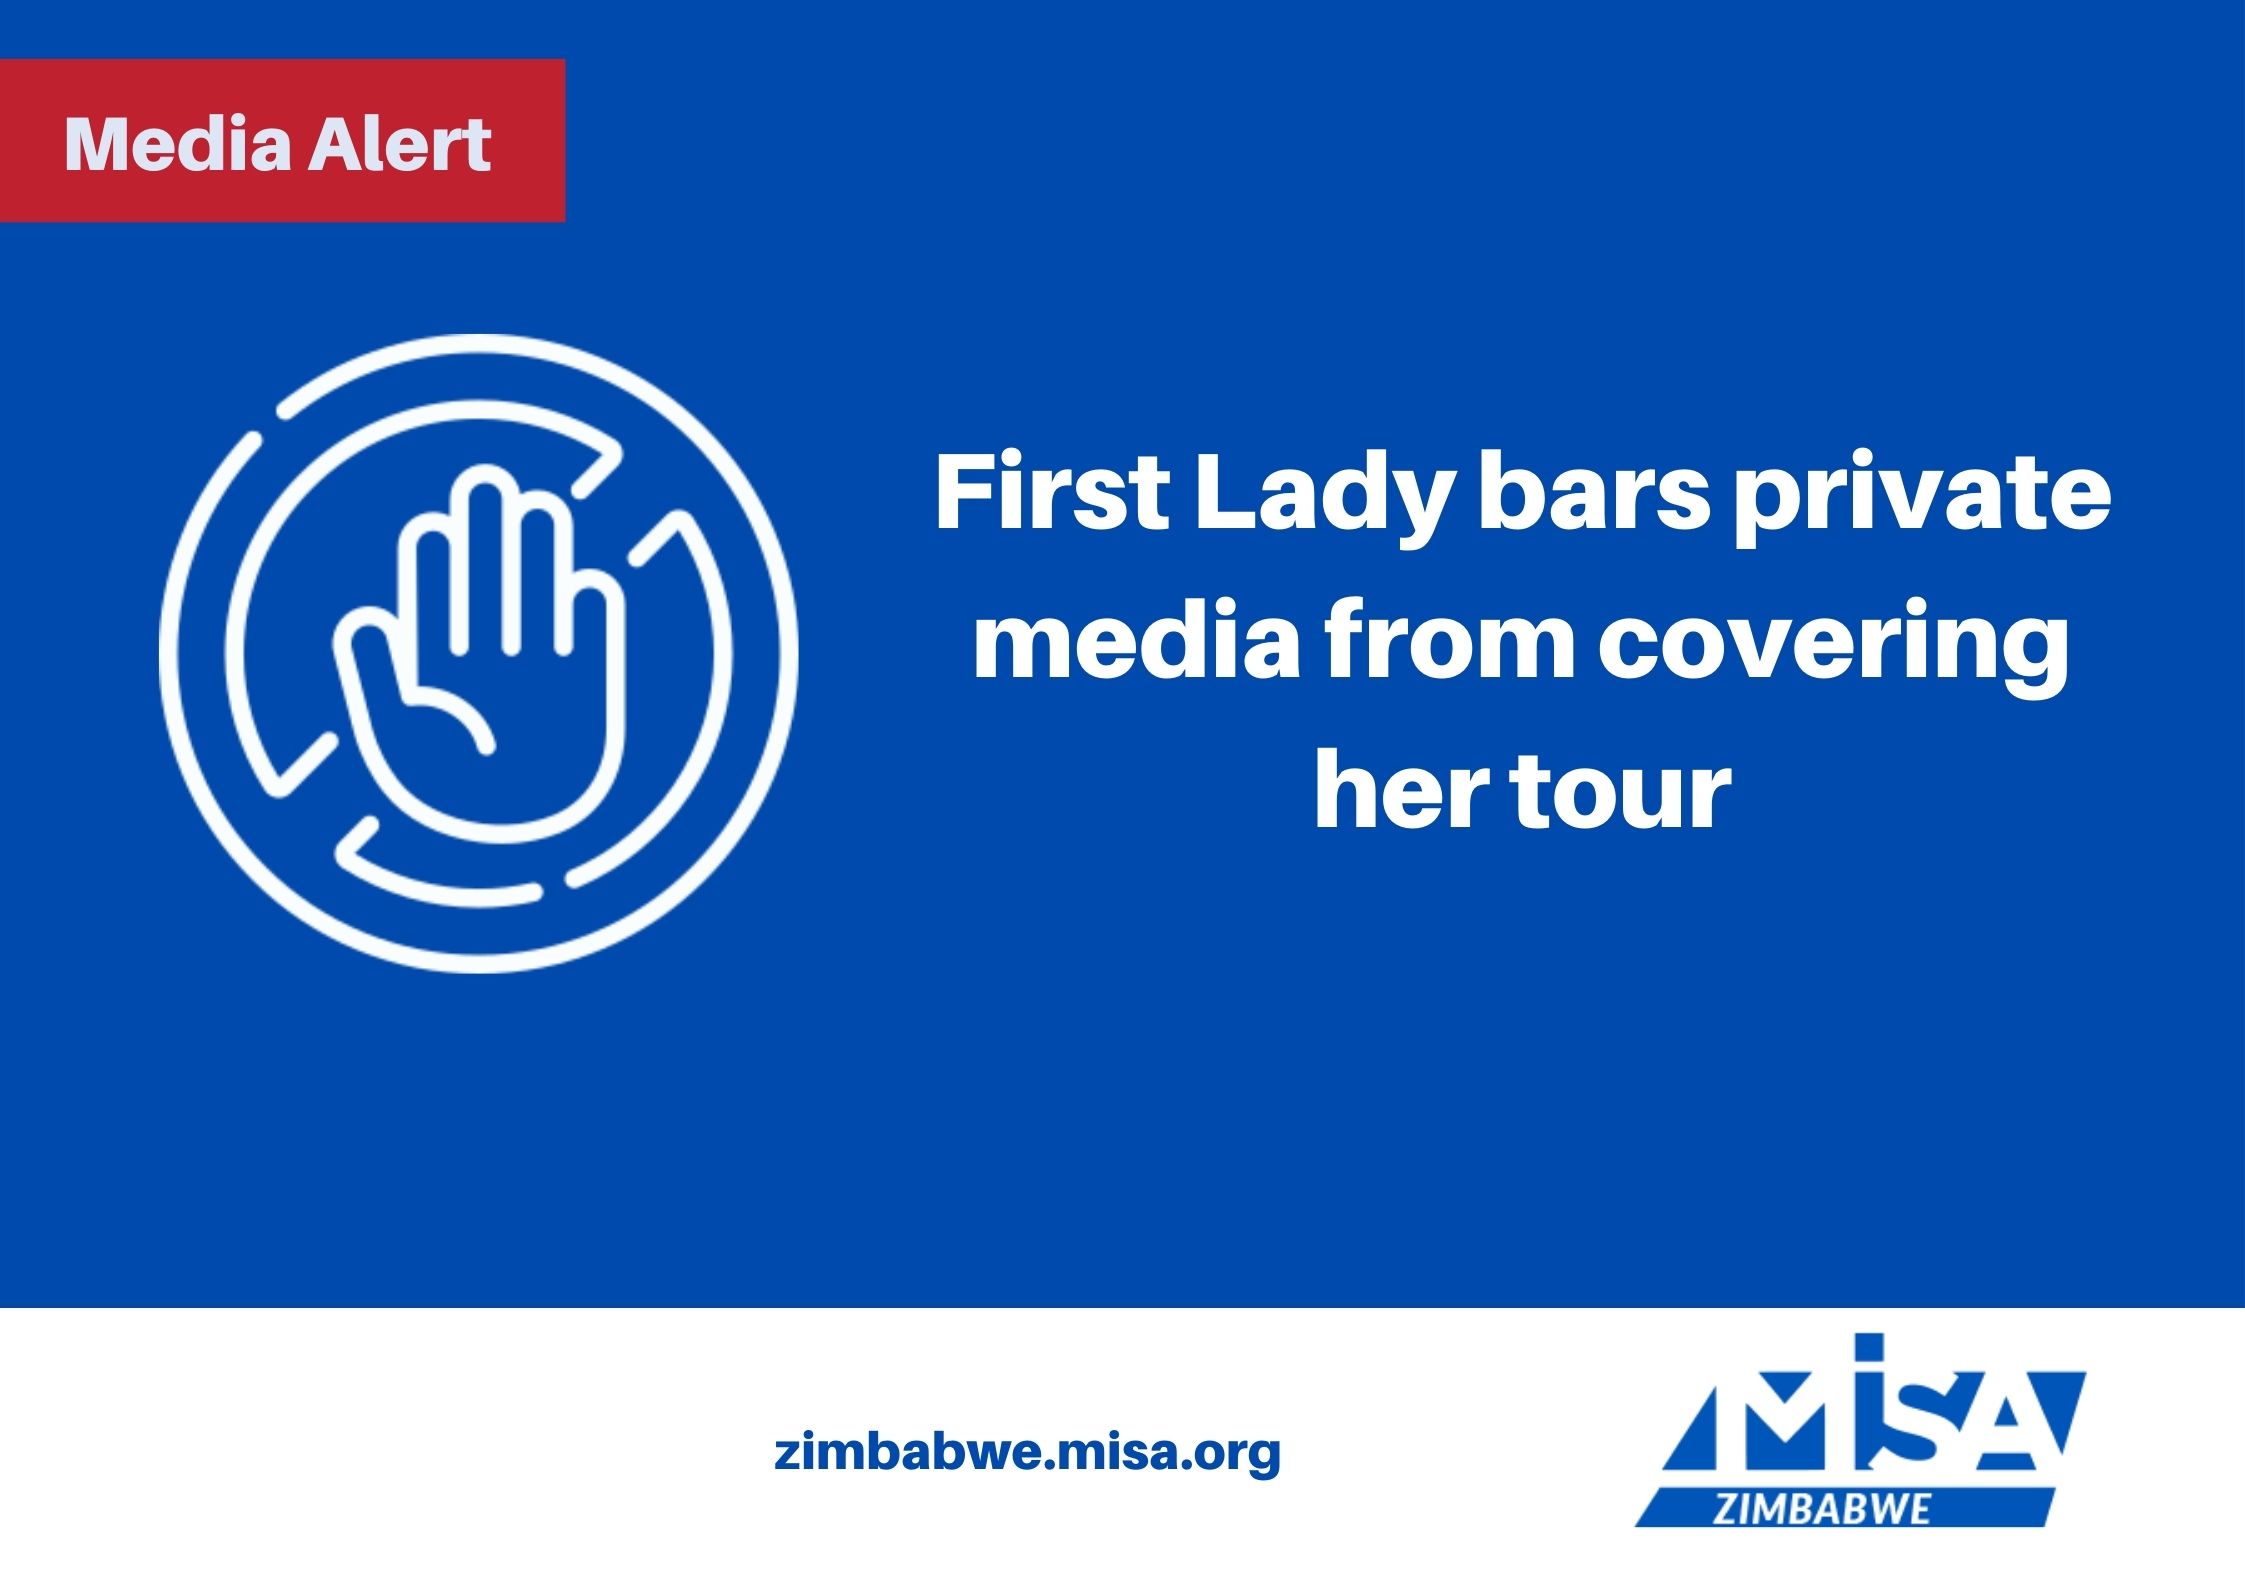 First Lady bars private media from covering her tour